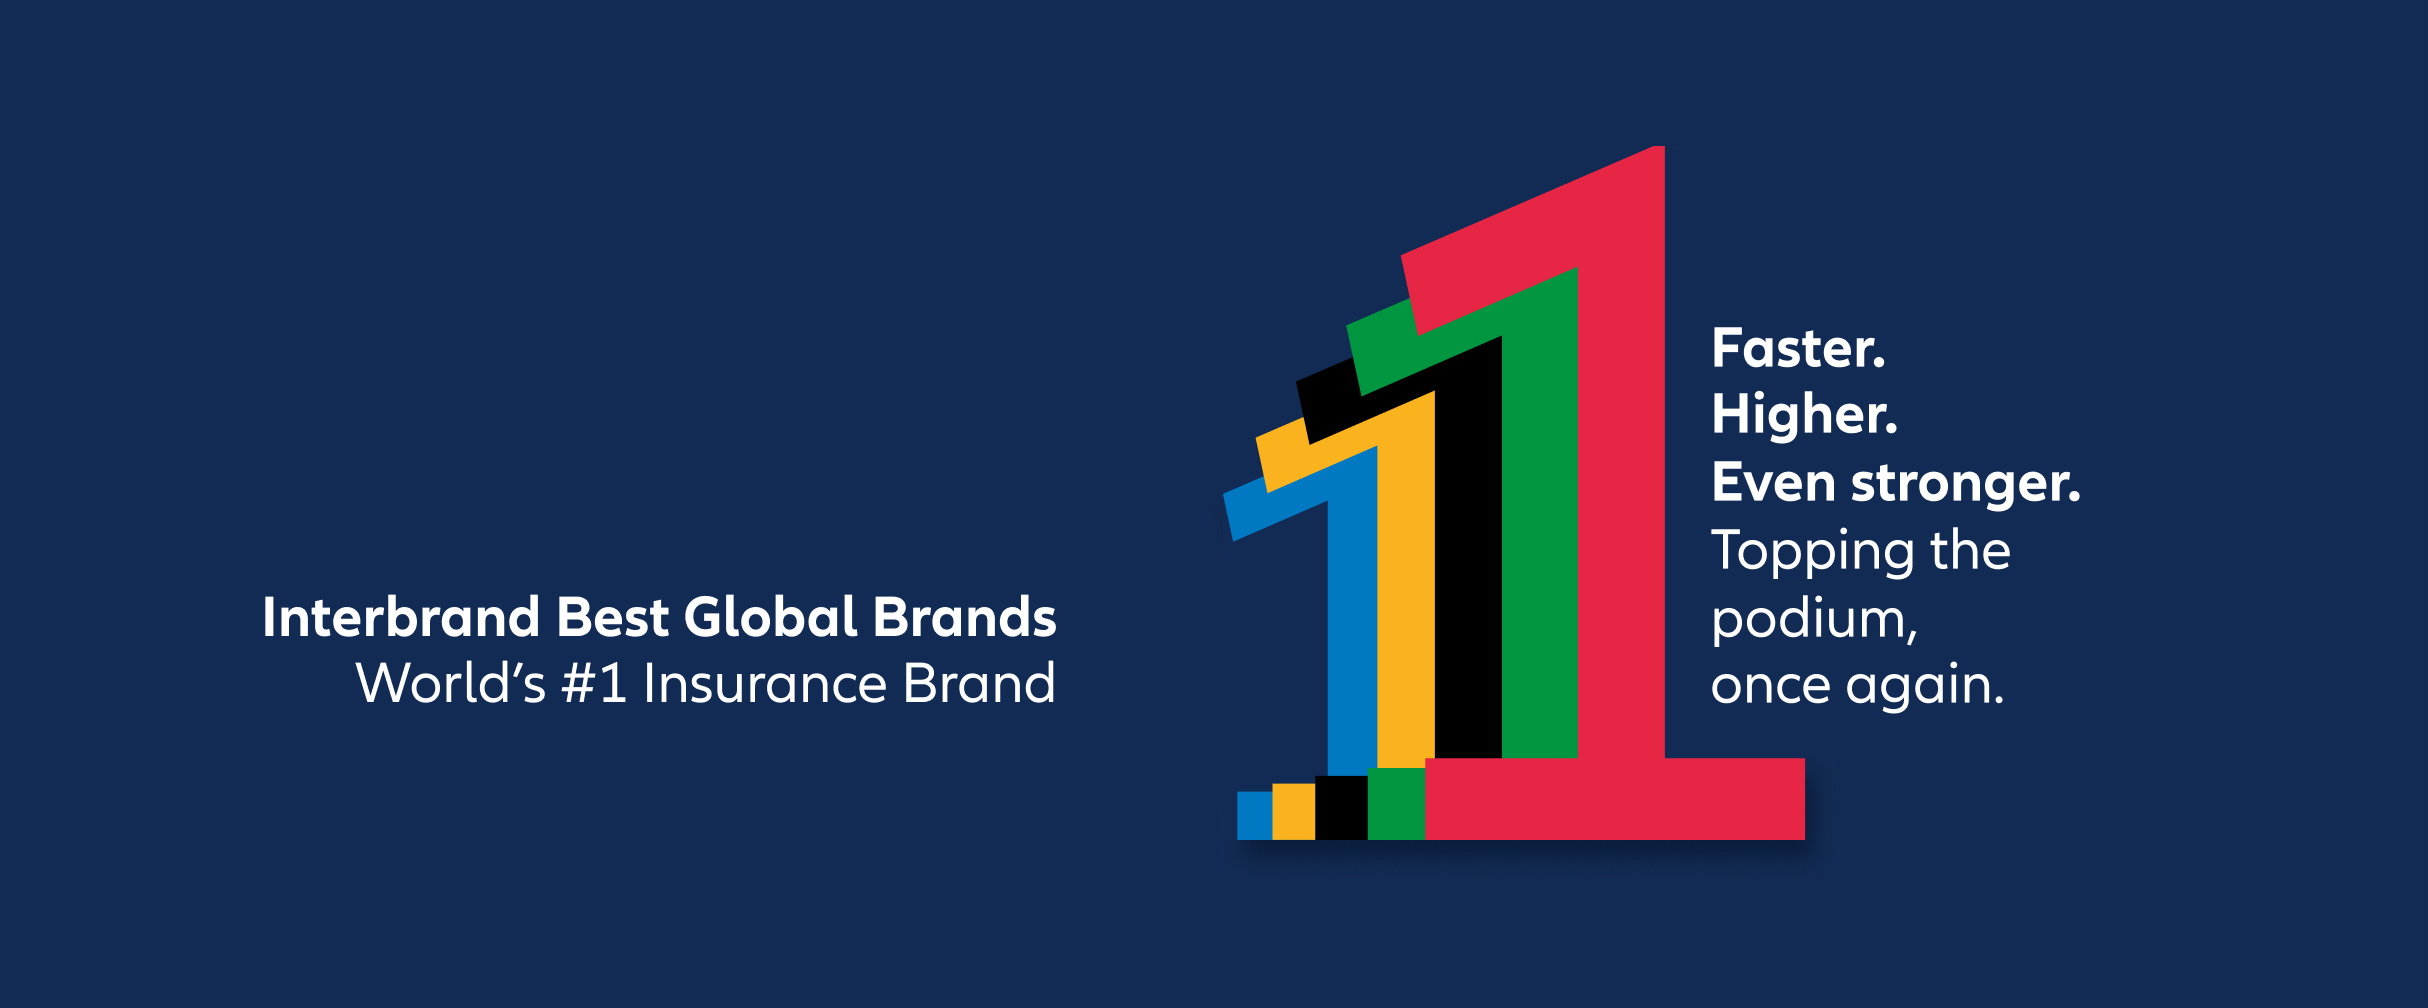 Colorful number 1 illustration with headline "All for #1 and the world's #1 insurer for all" as well as the Allianz logo and the Best Global Brands 2022 Interbrand logo